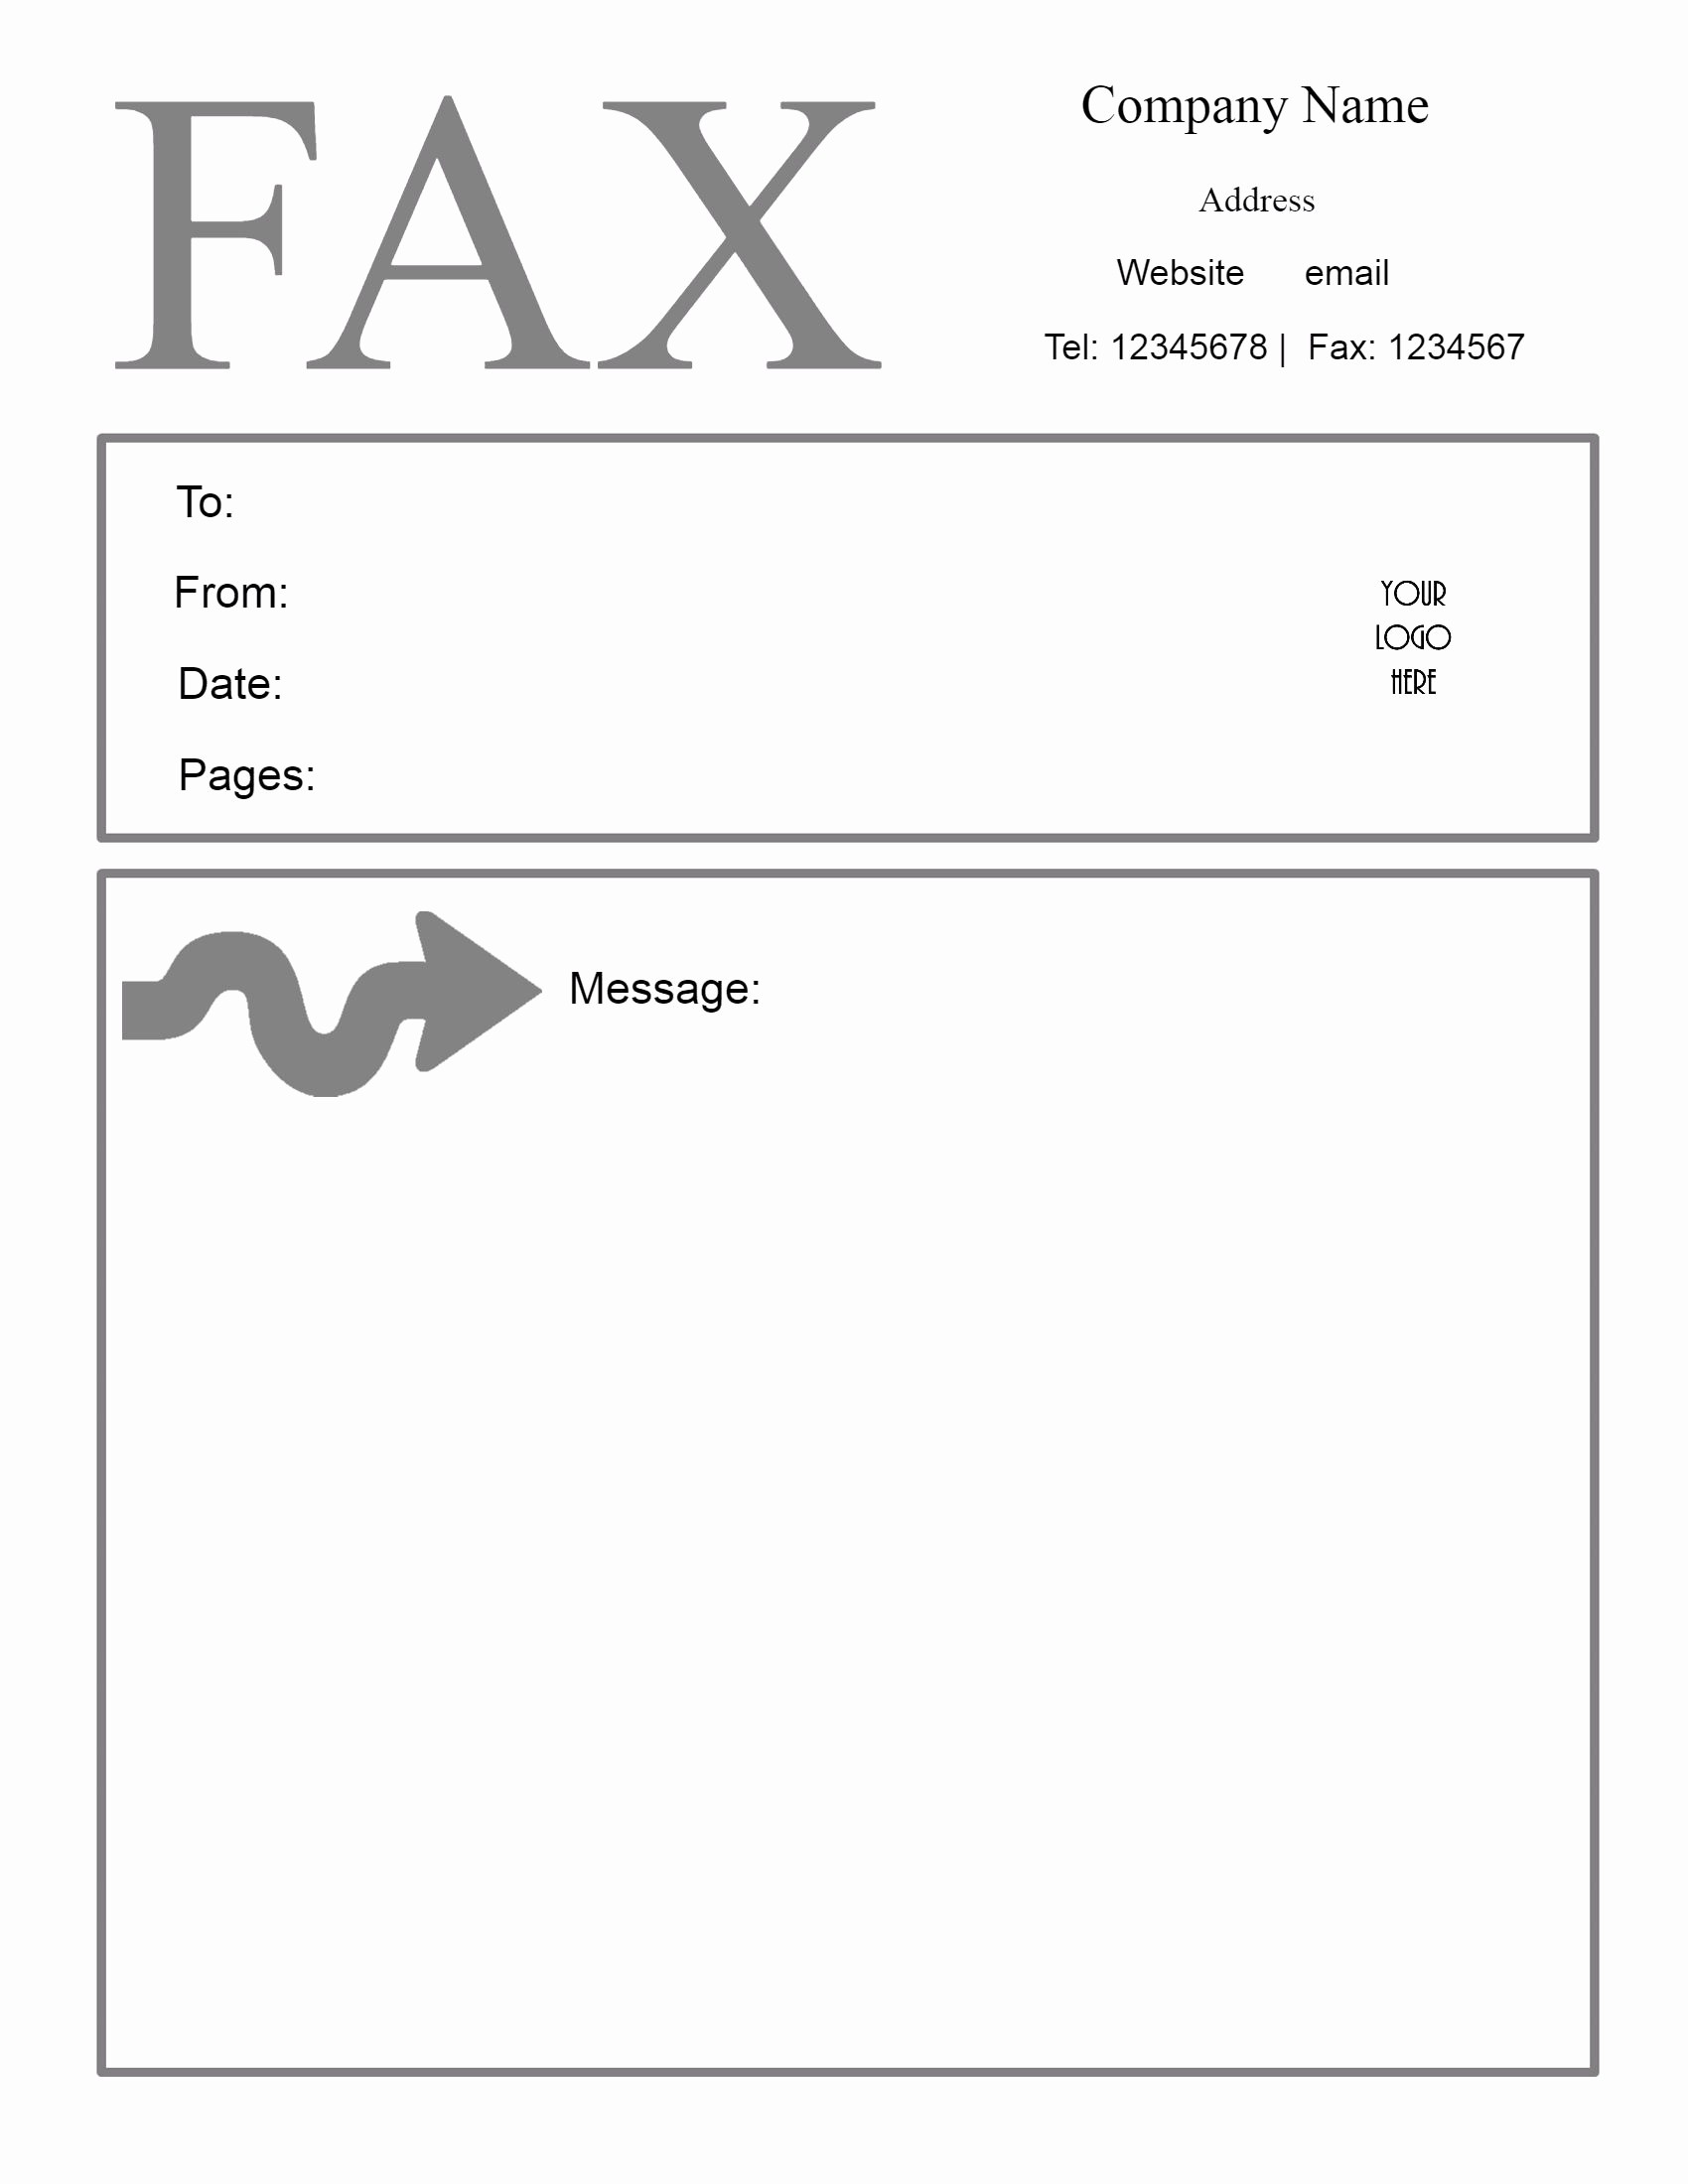 Print A Fax Cover Sheet Luxury Free Fax Cover Sheet Template